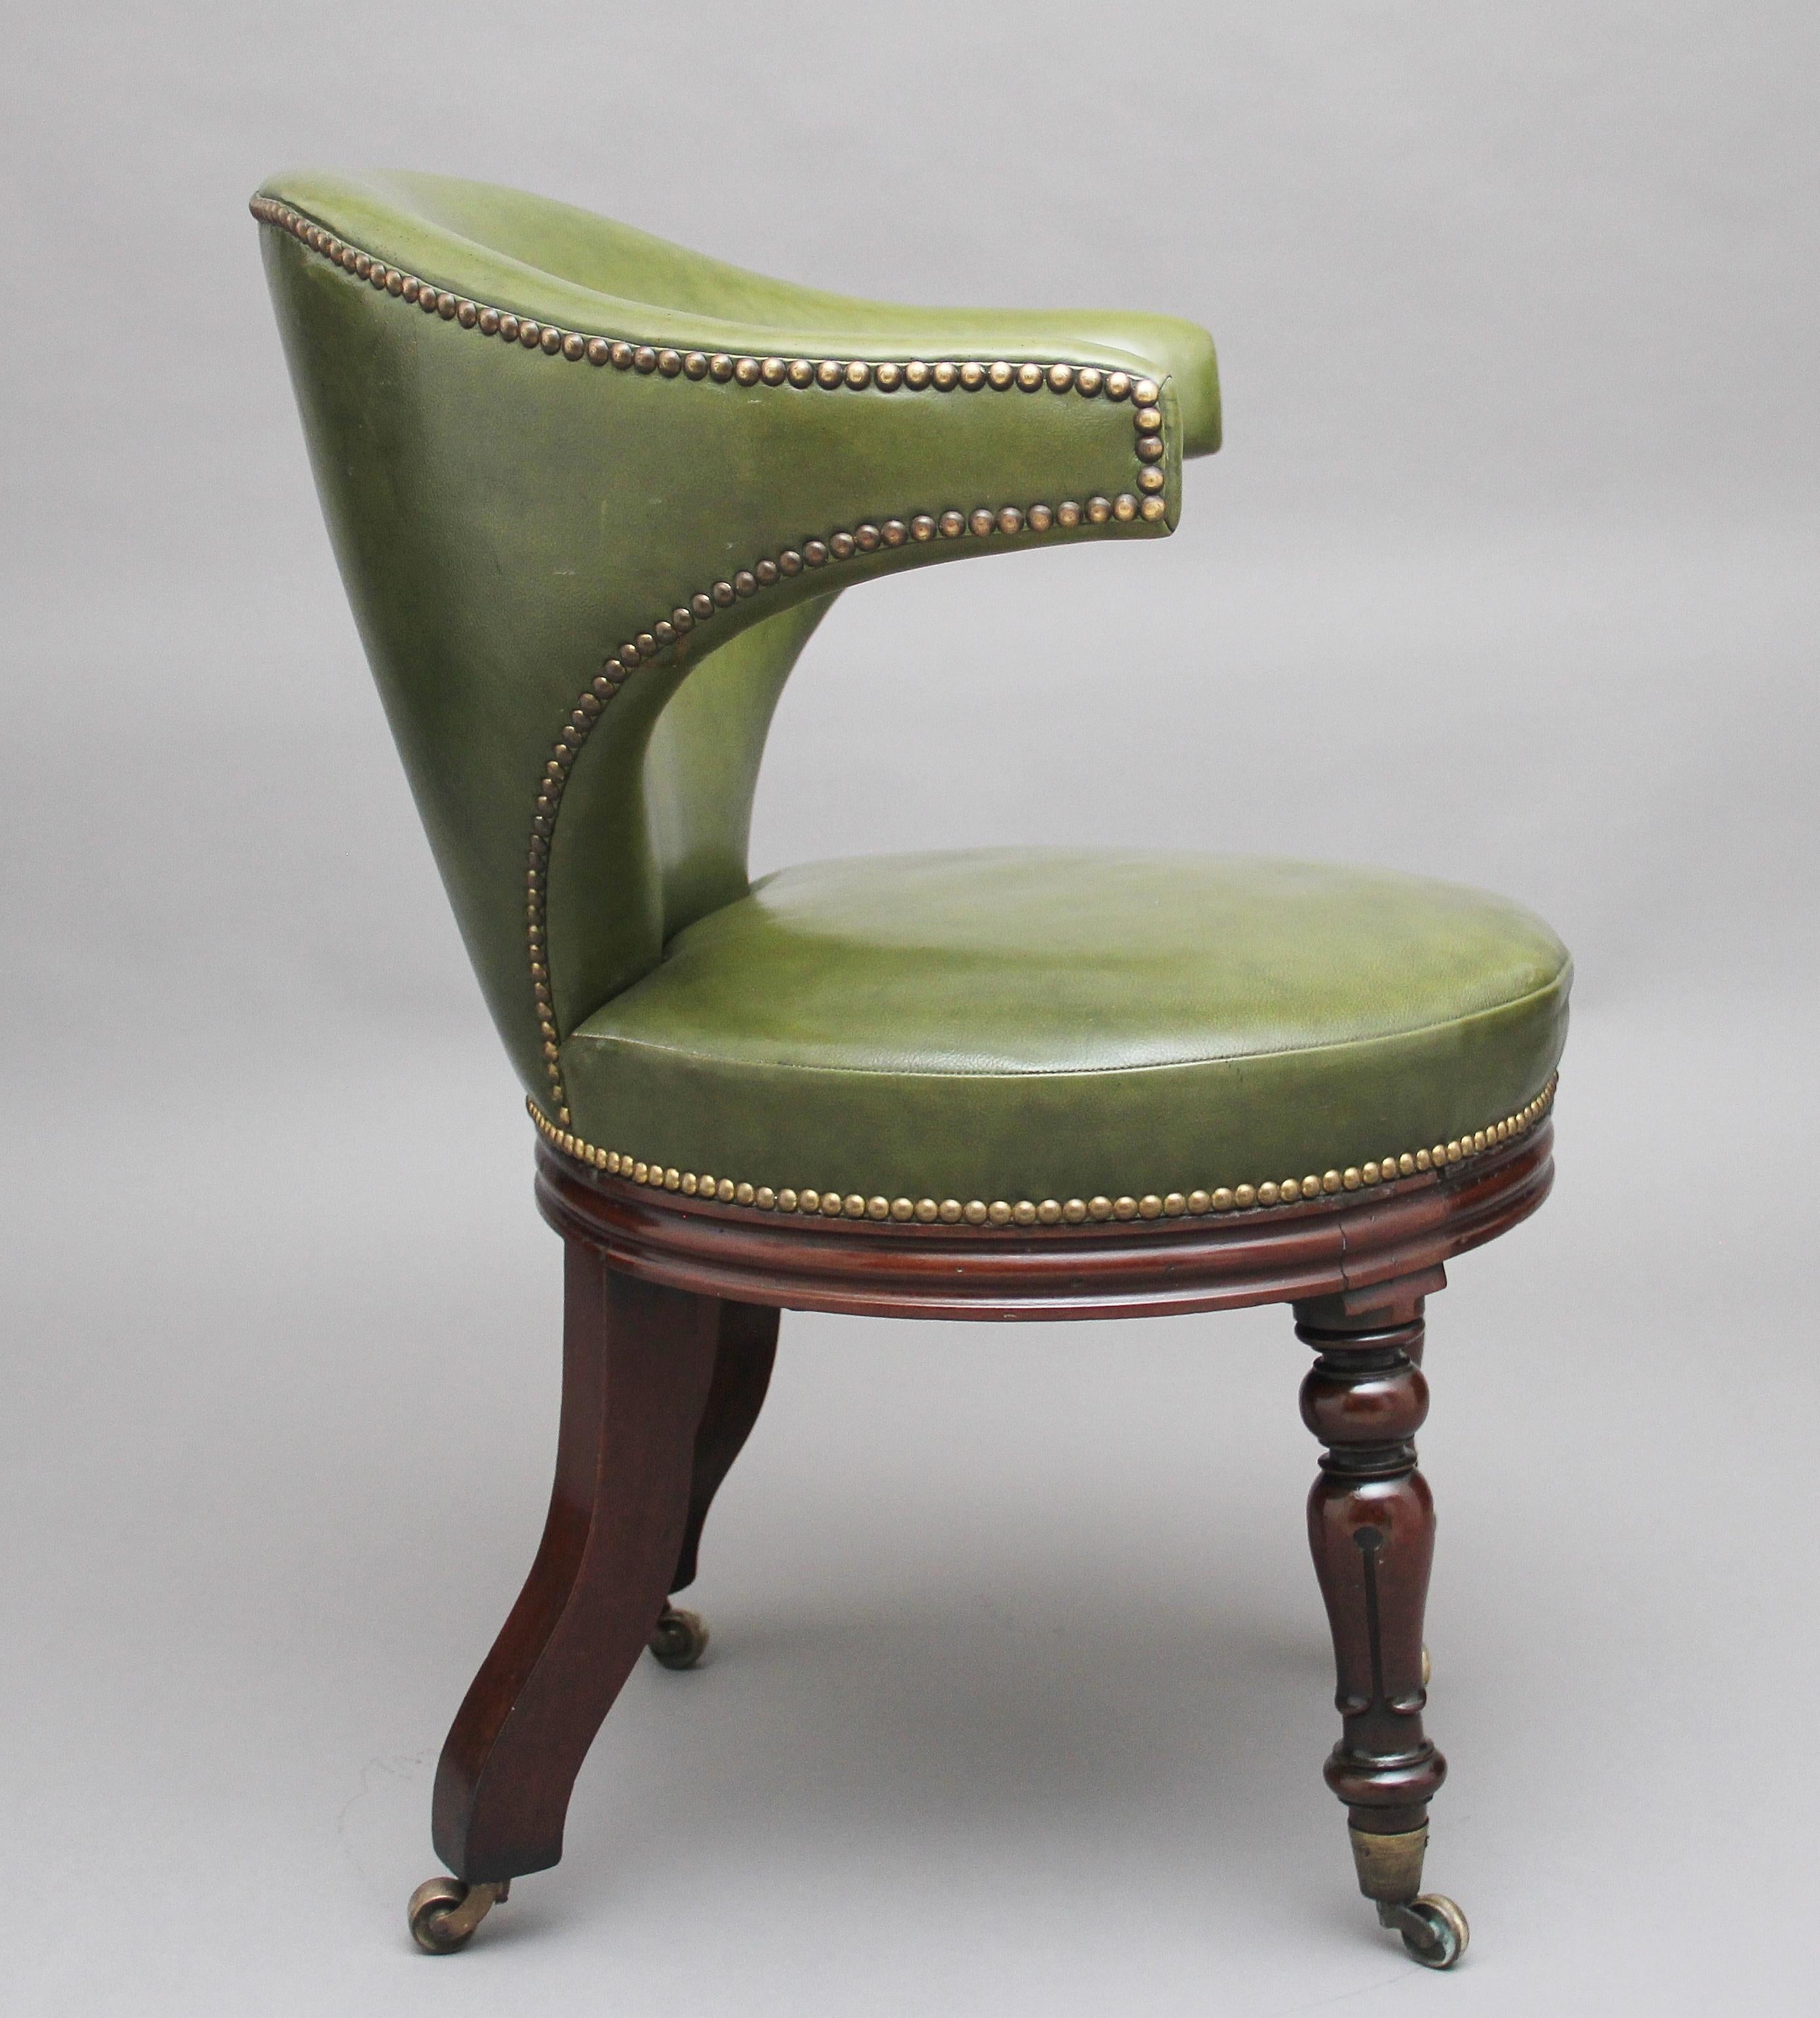 Regency 19th Century Mahogany and Green Leather Desk Chair